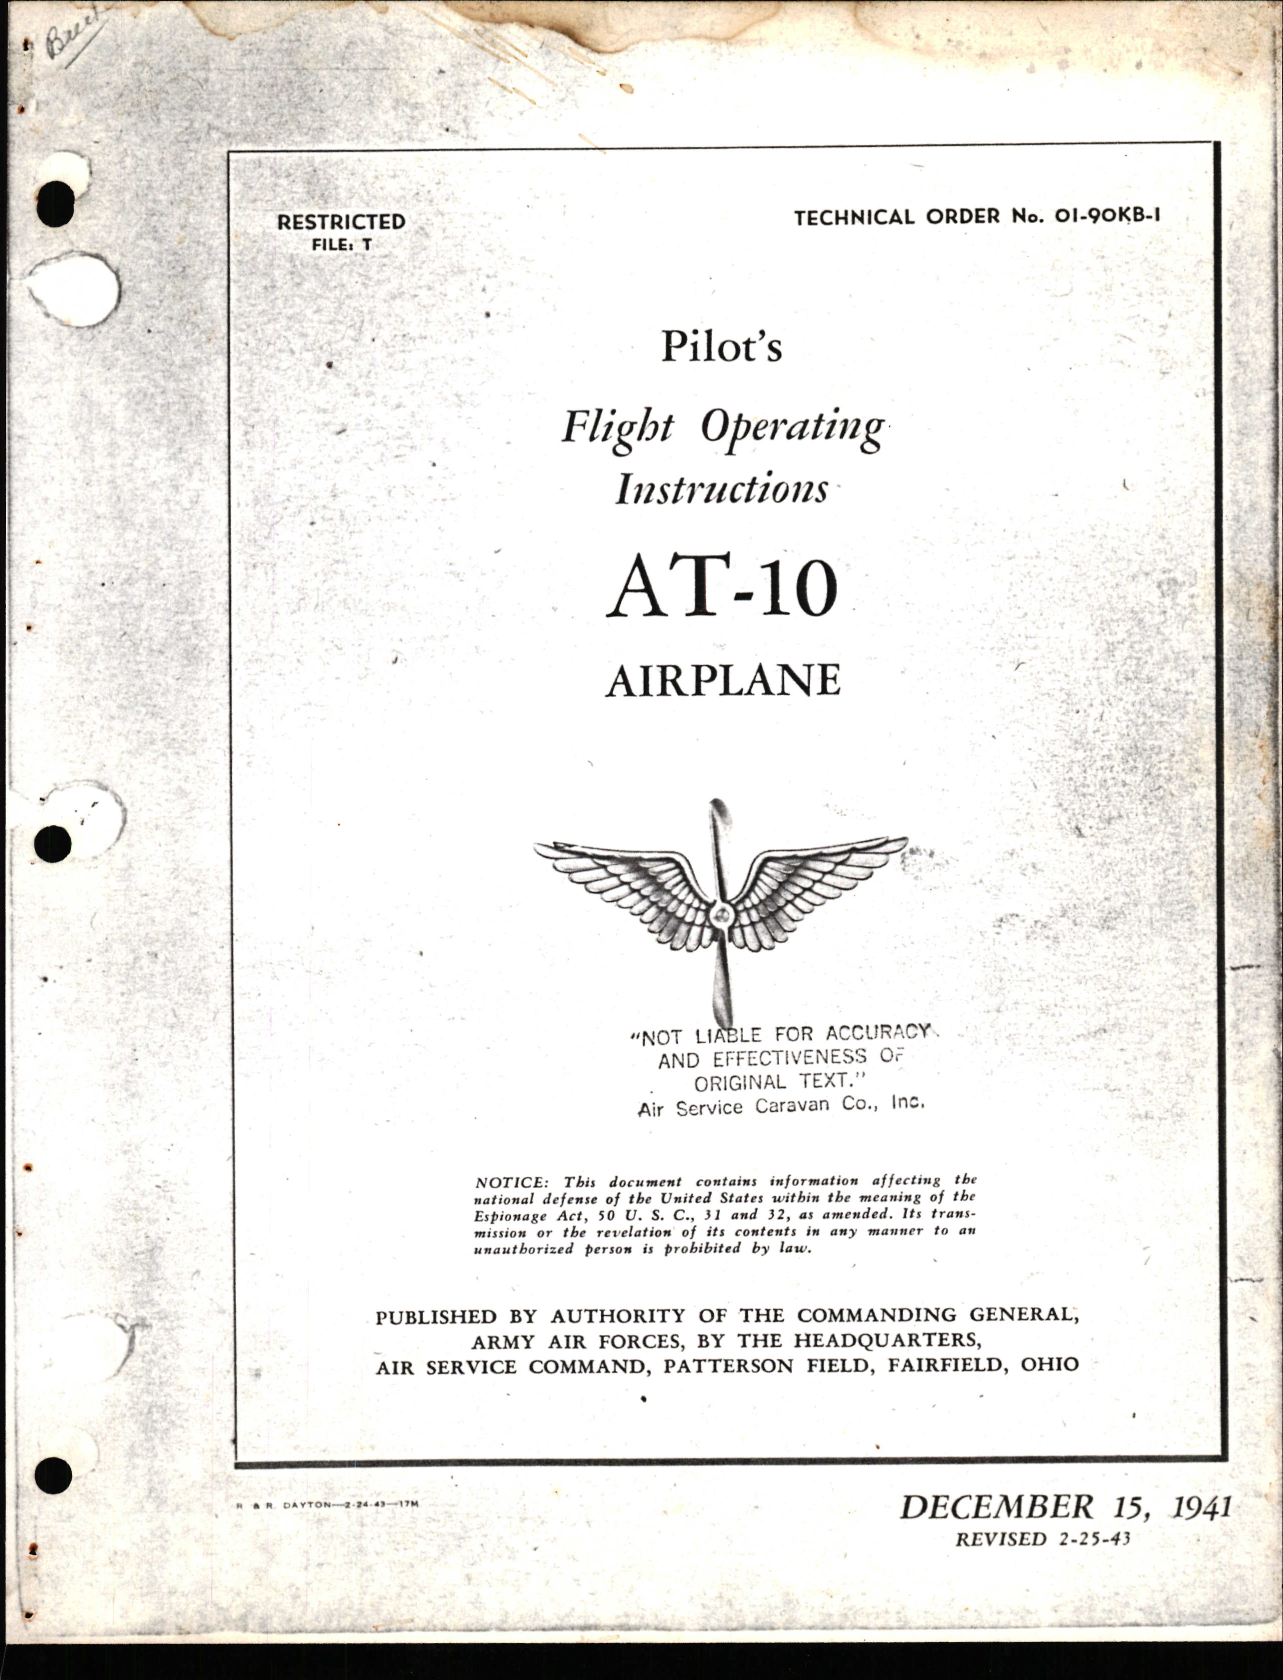 Sample page 1 from AirCorps Library document: Pilot's Flight Operating Instructions for AT-10 